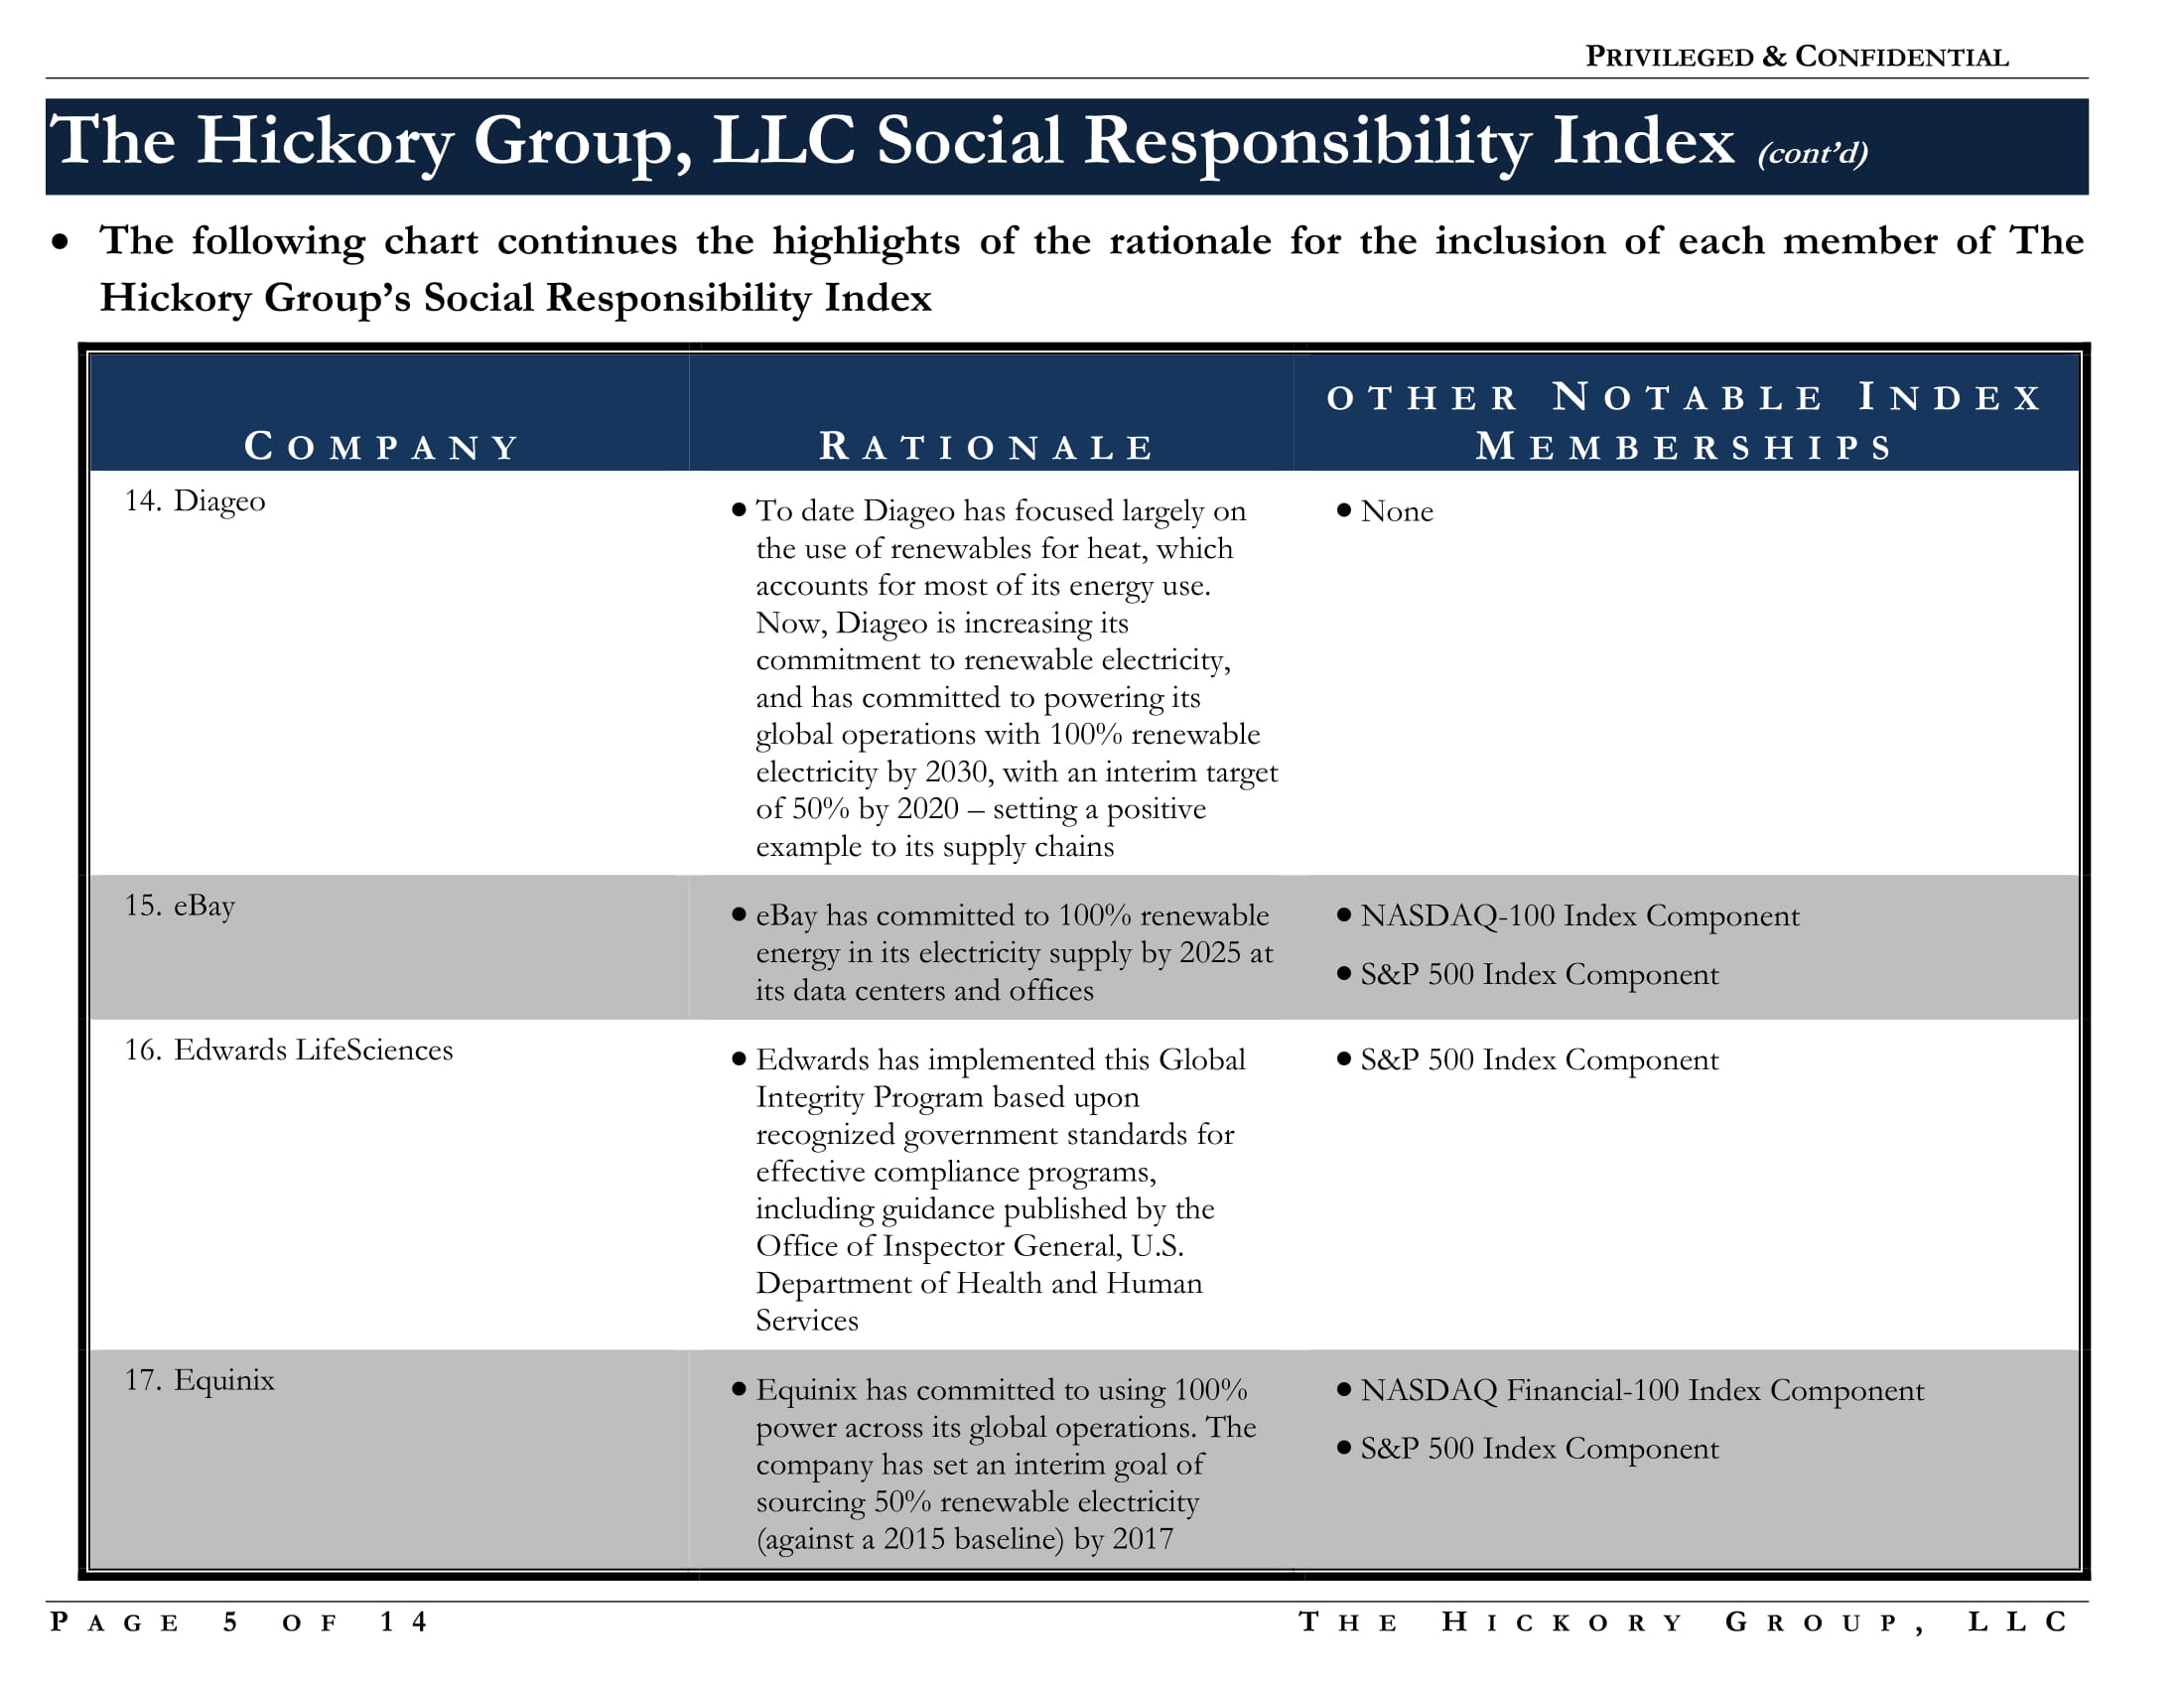 FINAL Social Responsibility Index  Notes and Rationale (7 October 2017) Privileged and Confidential-05.jpg